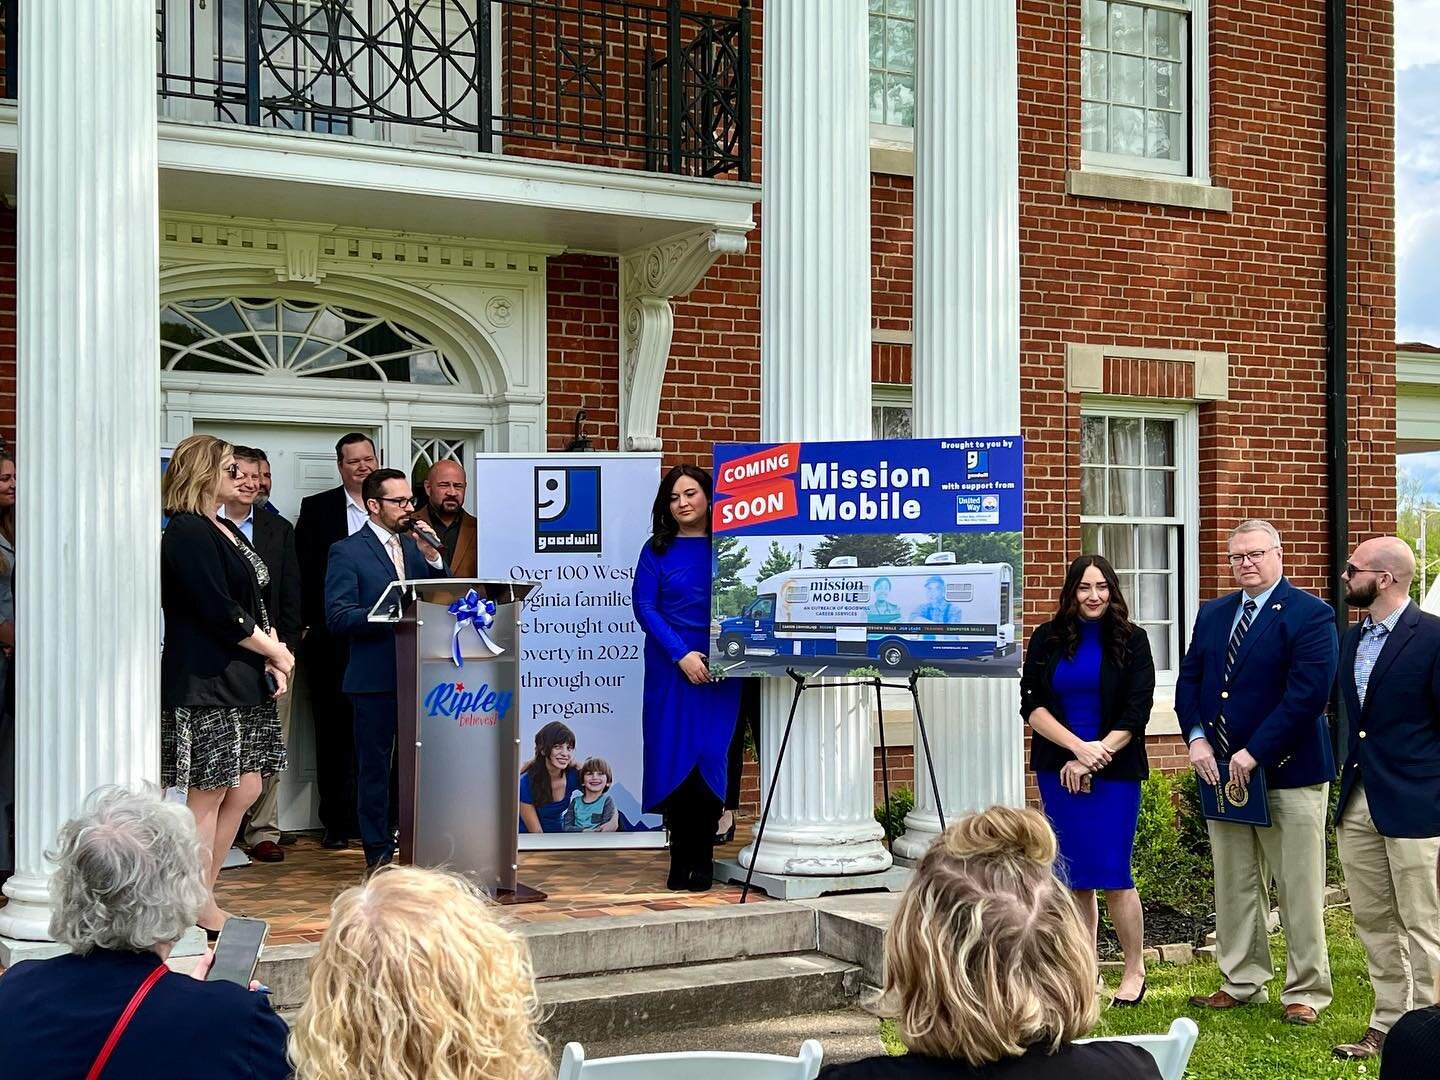 Goodwill Industries of Kanawha Valley, Inc. announced the launch of Mission Mobile yesterday. 

Mission Mobile is a custom mobile unit that will serve as a career and training development hub equipped to travel Goodwill&rsquo;s twenty-county footprin